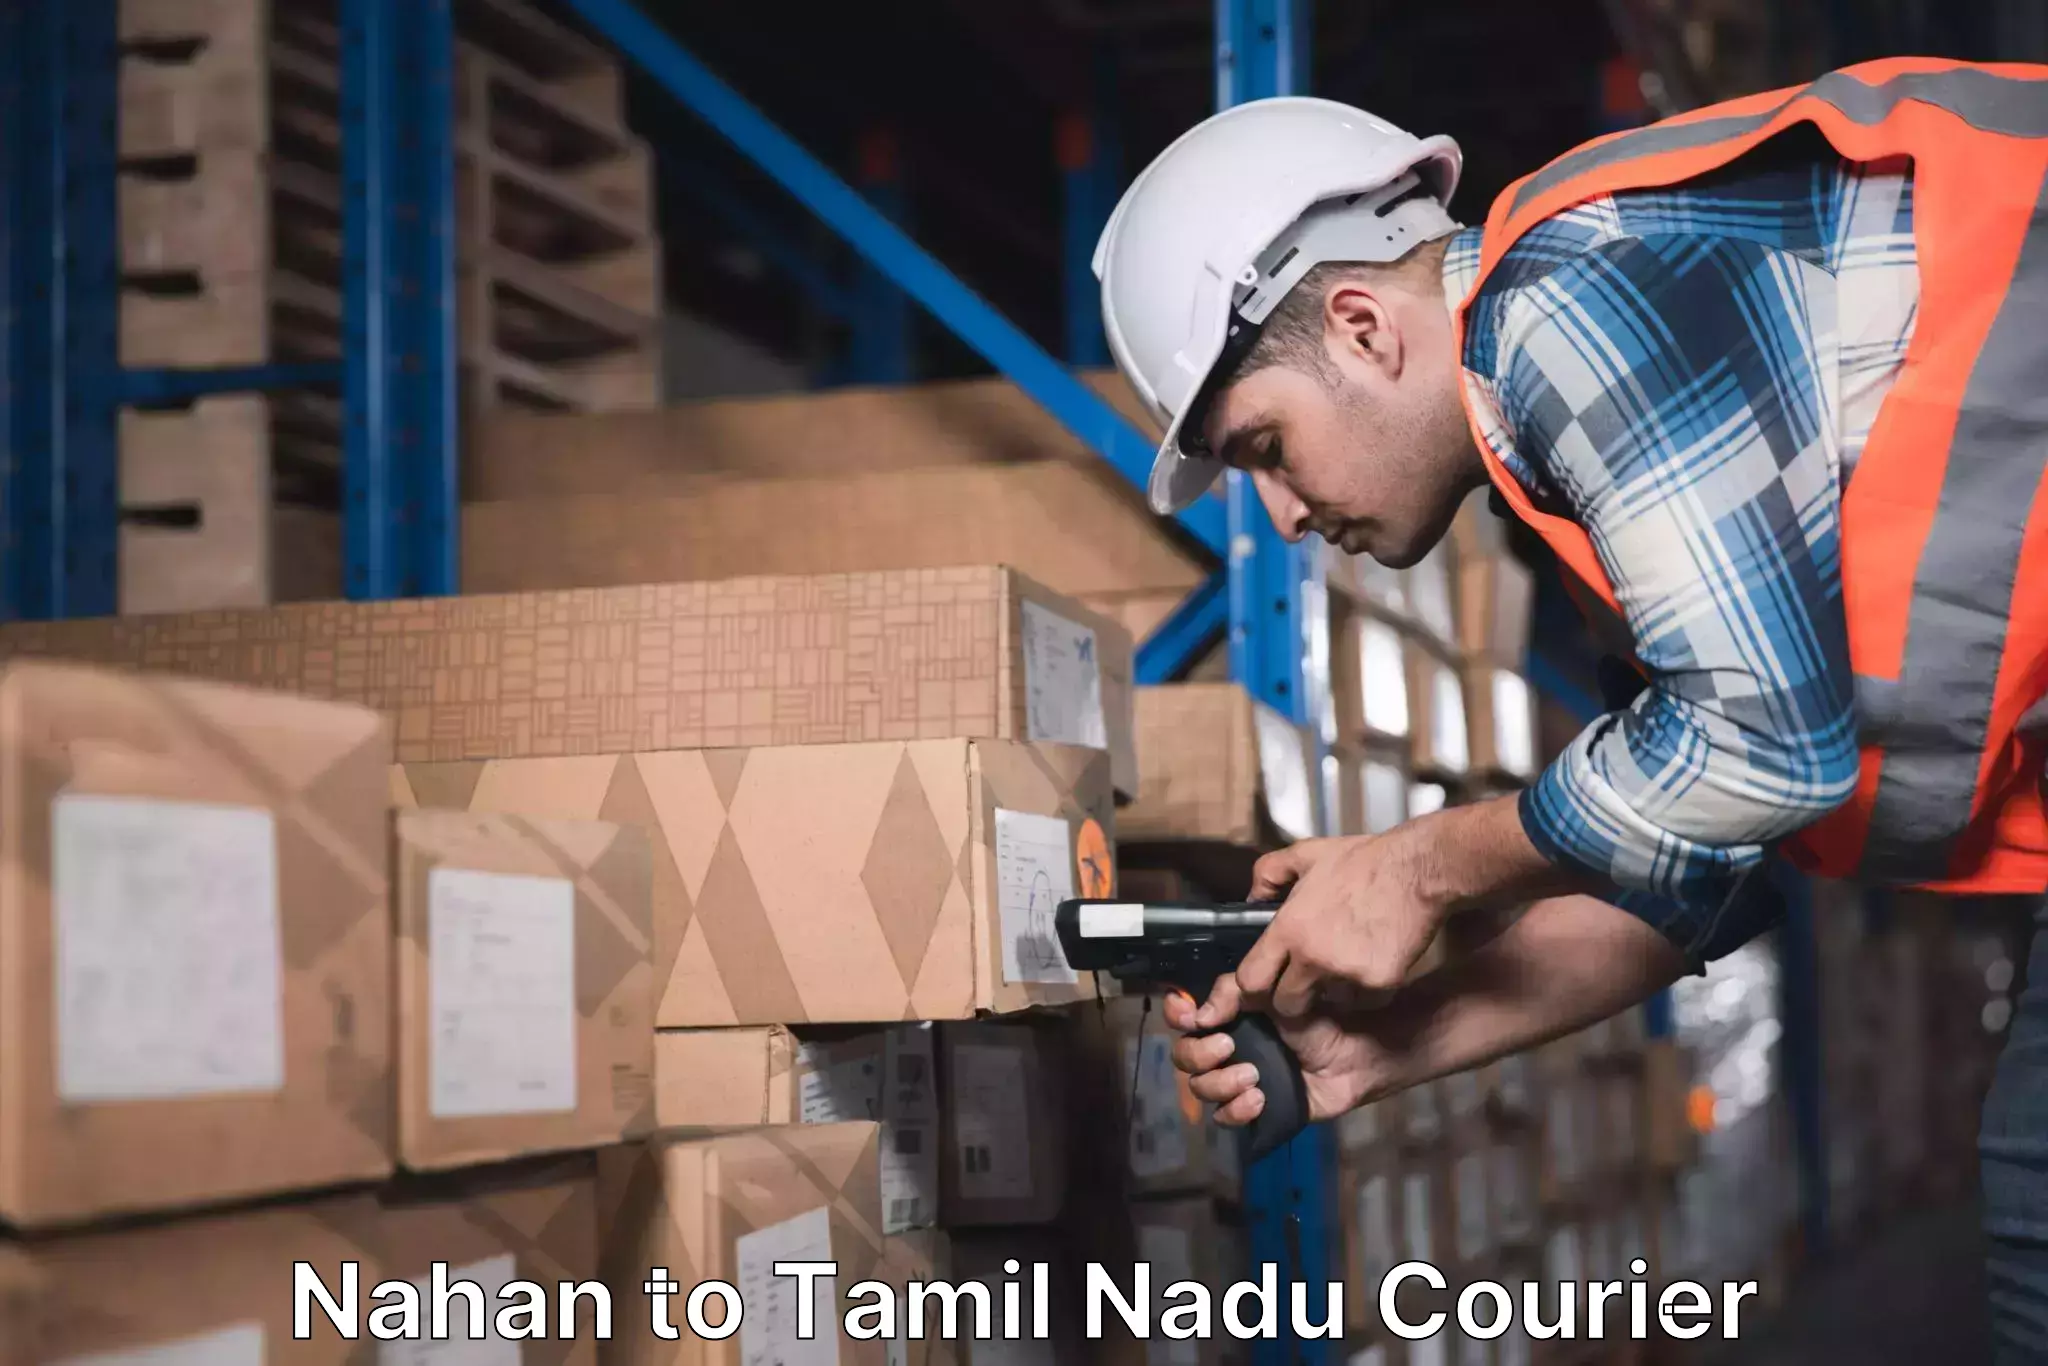 Courier tracking online Nahan to Ennore Port Chennai